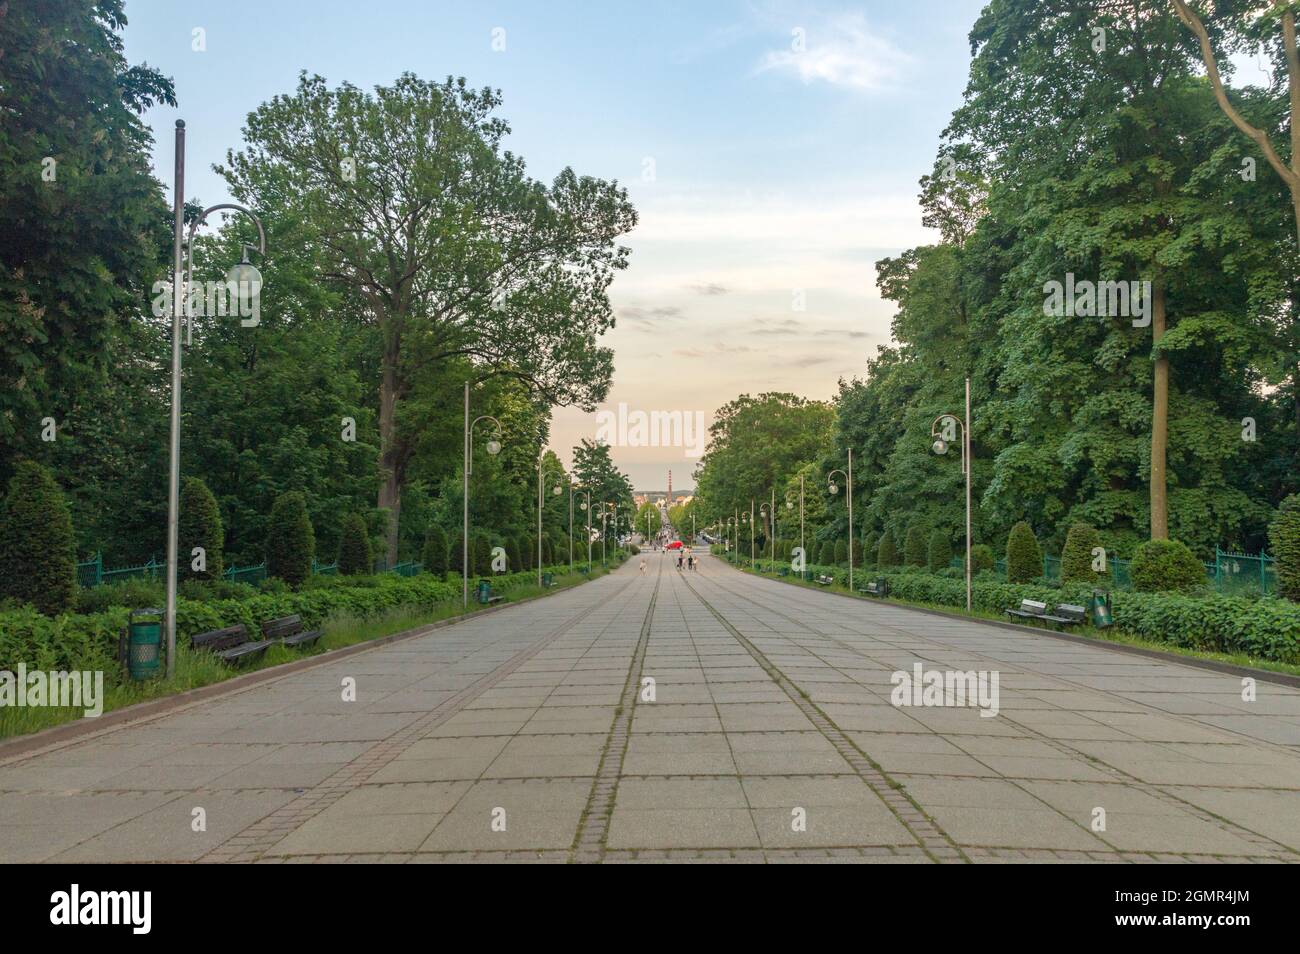 Sunset view on Holy Virgin Mary Avenue at Czestochowa, Poland. Stock Photo